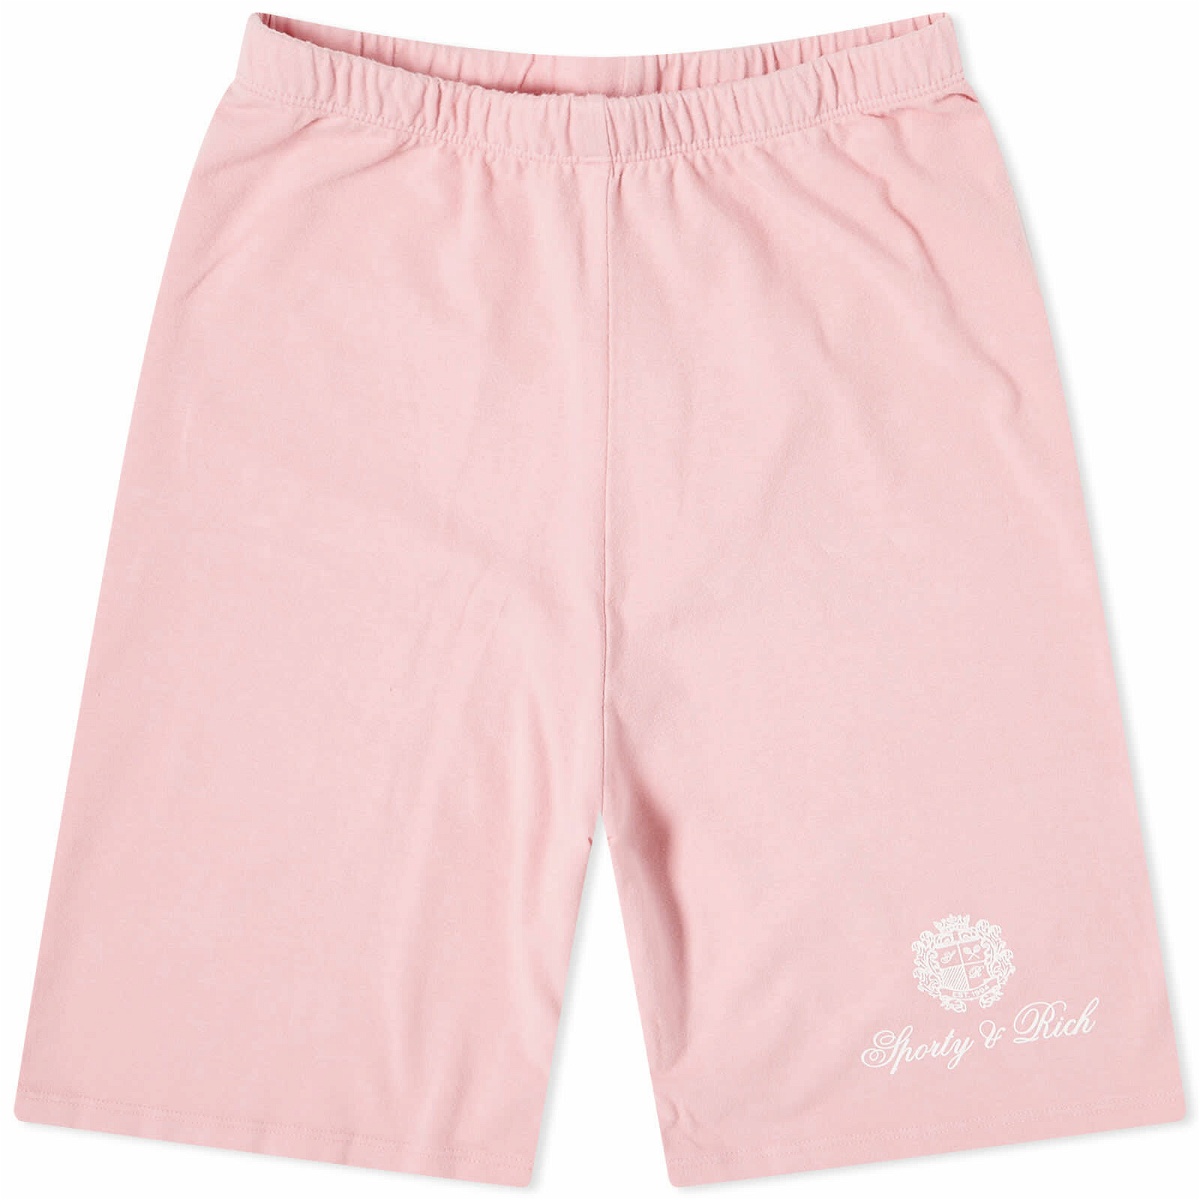 Photo: Sporty & Rich Women's Country Crest Biker Cycling Short in Rose/White